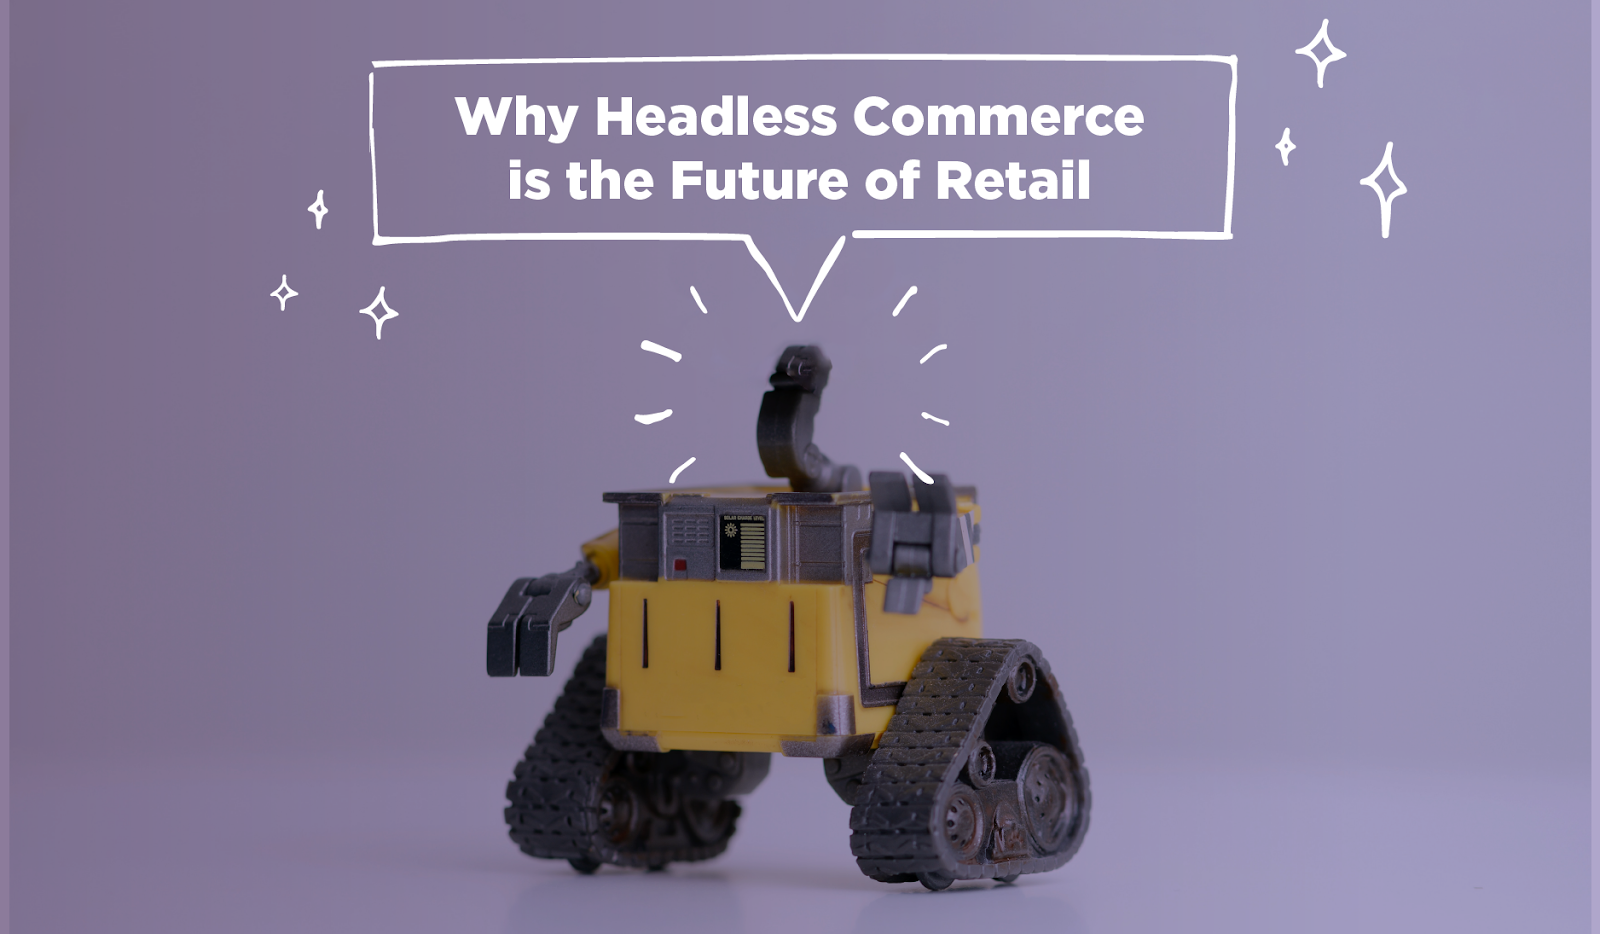 Why Headless Commerce is the Future of Retail